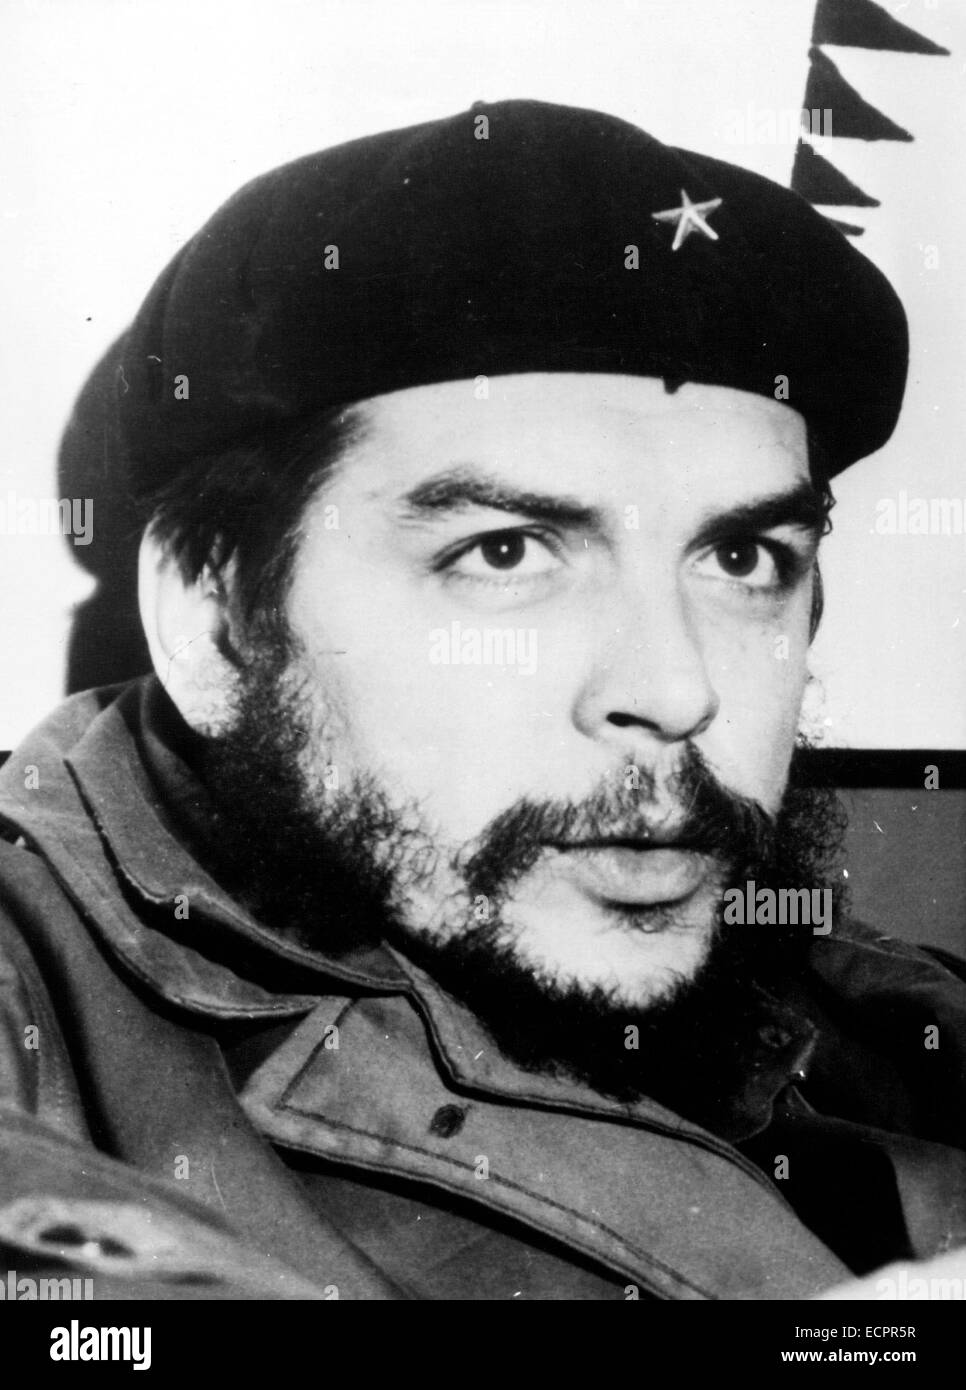 The US and Cuba announced an agreement between the two countries that will be a first step toward normalizing relations. PICTURED: Jan. 1, 1960 - Punta del Este, Uruguay - By the time ERNESTO GUEVARA, known to us as Che, was murdered in the jungles of Bolivia in October 1967, he was already a legend. In 1956, along with FIDEL CASTRO and a handful of others, he had crossed the Caribbean in the rickety yacht Granma on the mission of invading Cuba. Over two years later, the insurgents entered Havana and launched what was to become the first and only victorious socialist revolution in the Americas Stock Photo